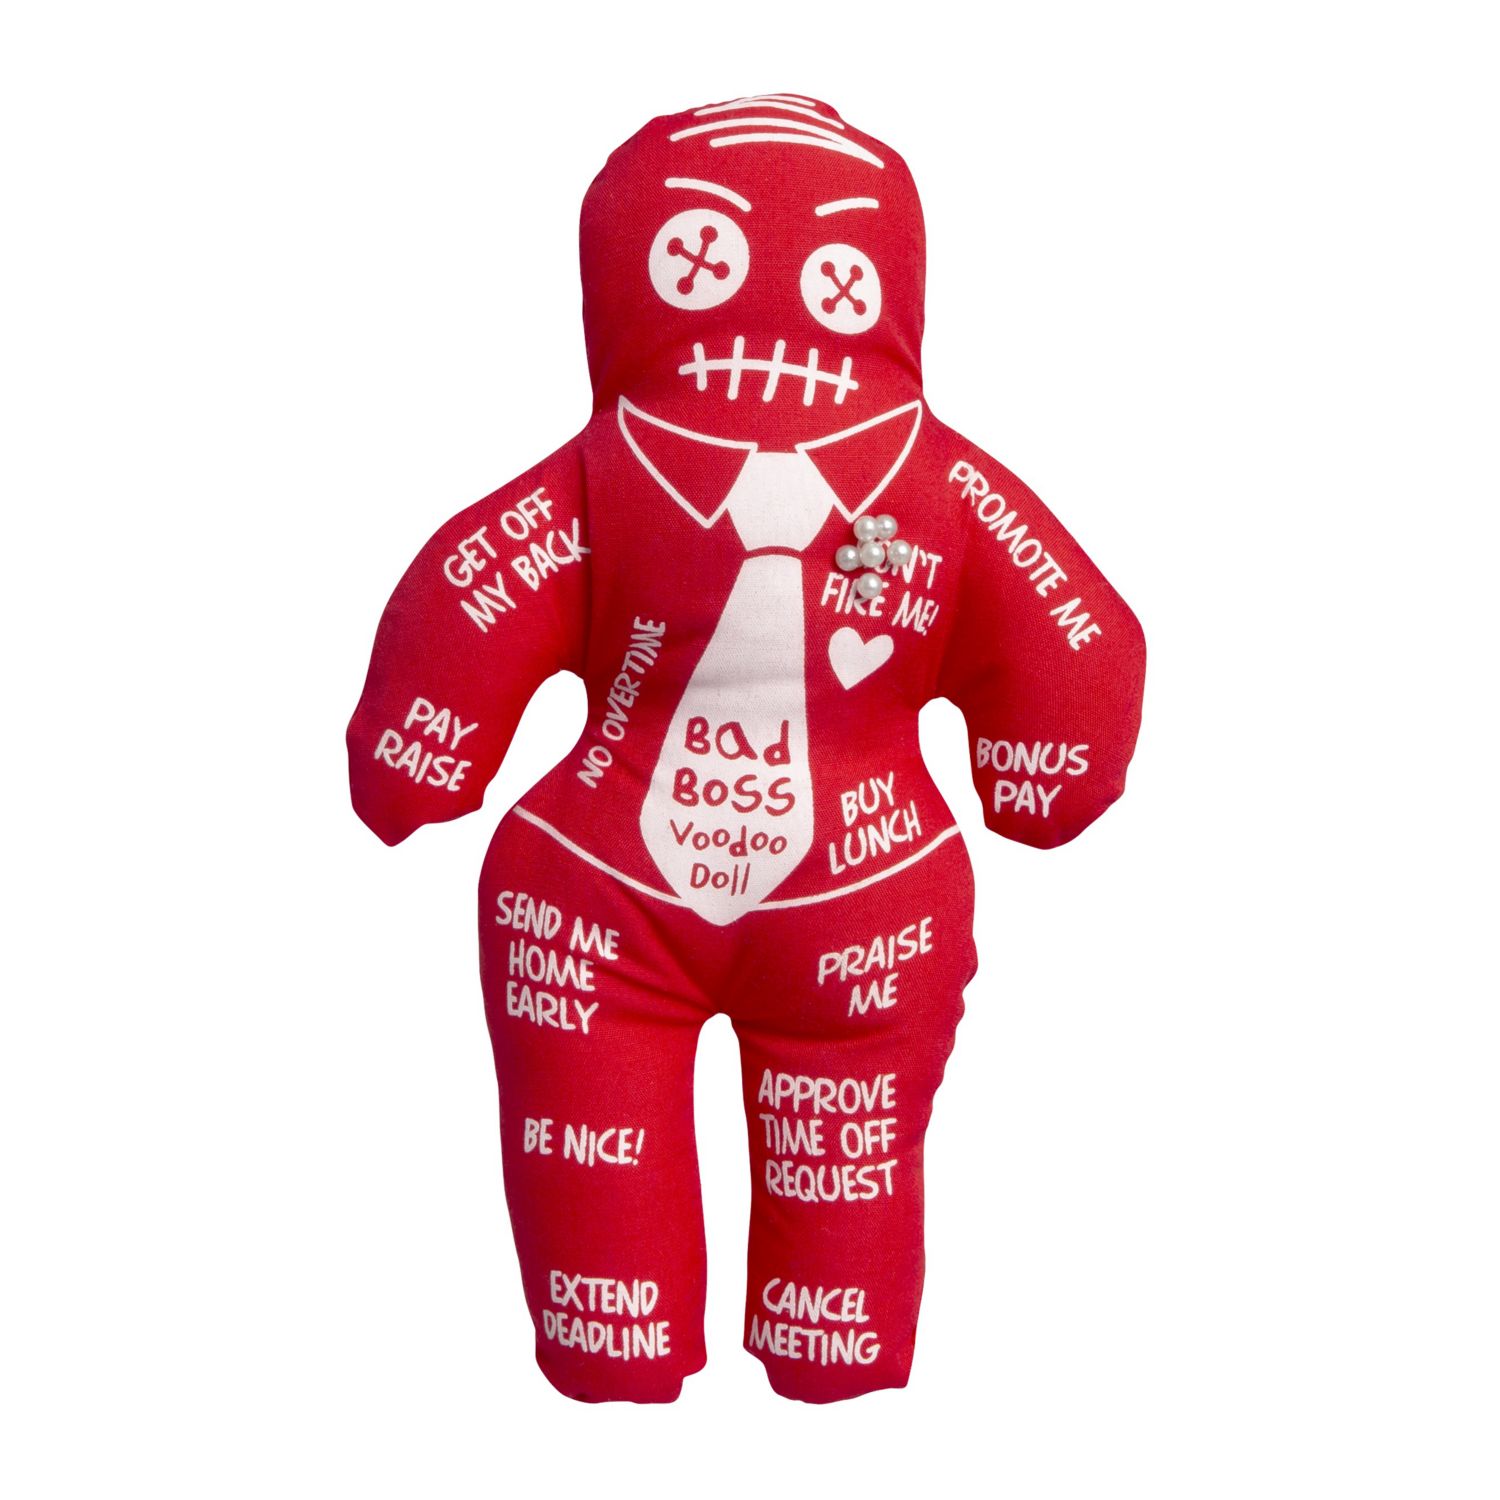 voodoo doll where to buy